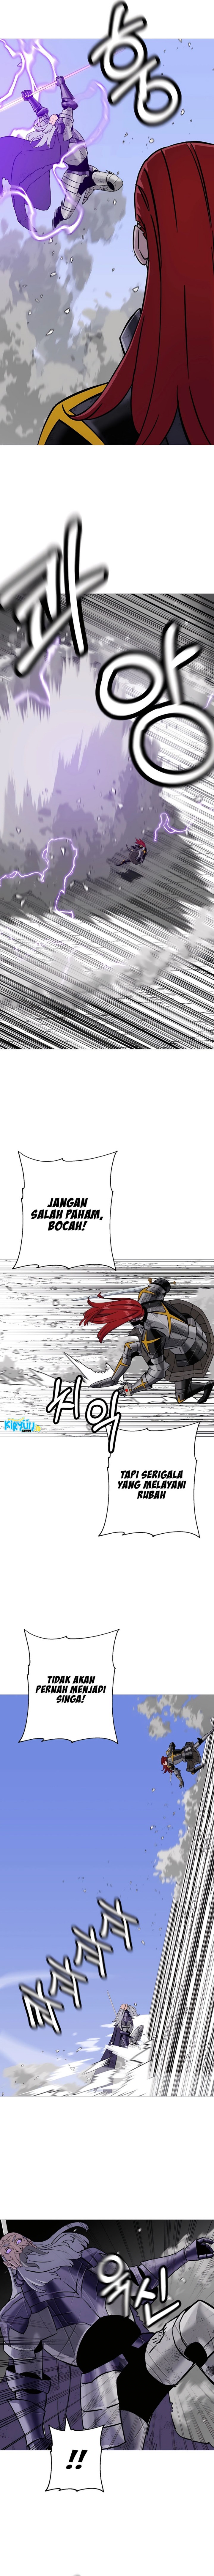 Dilarang COPAS - situs resmi www.mangacanblog.com - Komik the story of a low rank soldier becoming a monarch 136 - chapter 136 137 Indonesia the story of a low rank soldier becoming a monarch 136 - chapter 136 Terbaru 2|Baca Manga Komik Indonesia|Mangacan